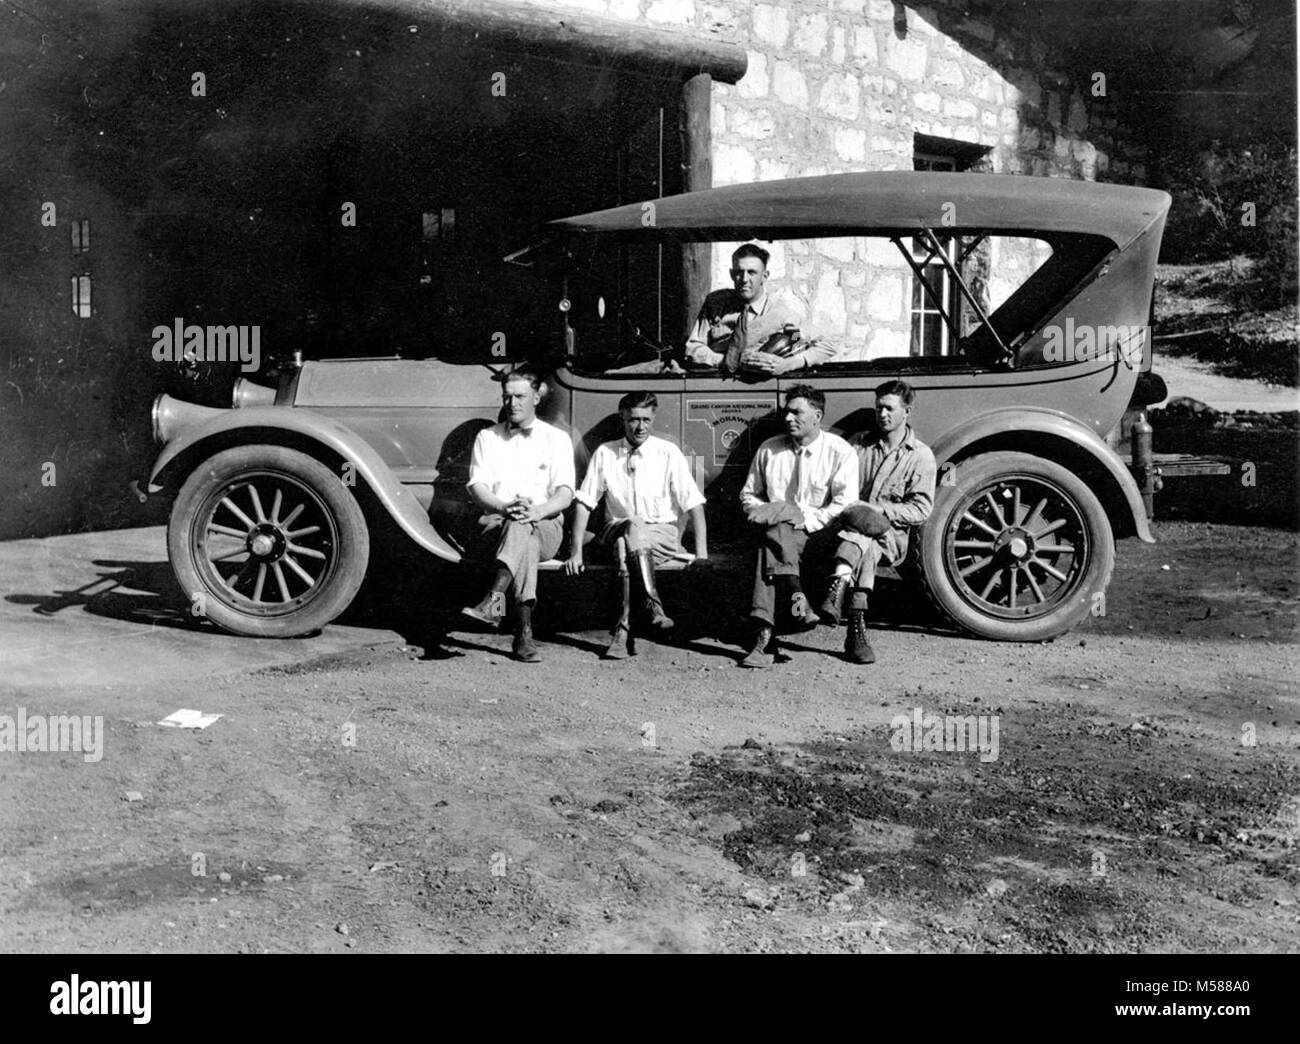 Grand Canyon National Park Tour Drivers. PIERCE ARROW TOURING CAR FRED HARVEY PUBLIC GARAGE. CURLY ENNIS 3RD FROM LEFT. GRCA 14745. CIRCA 1922. FRED HARVEY. Historic photo from , Stock Photo